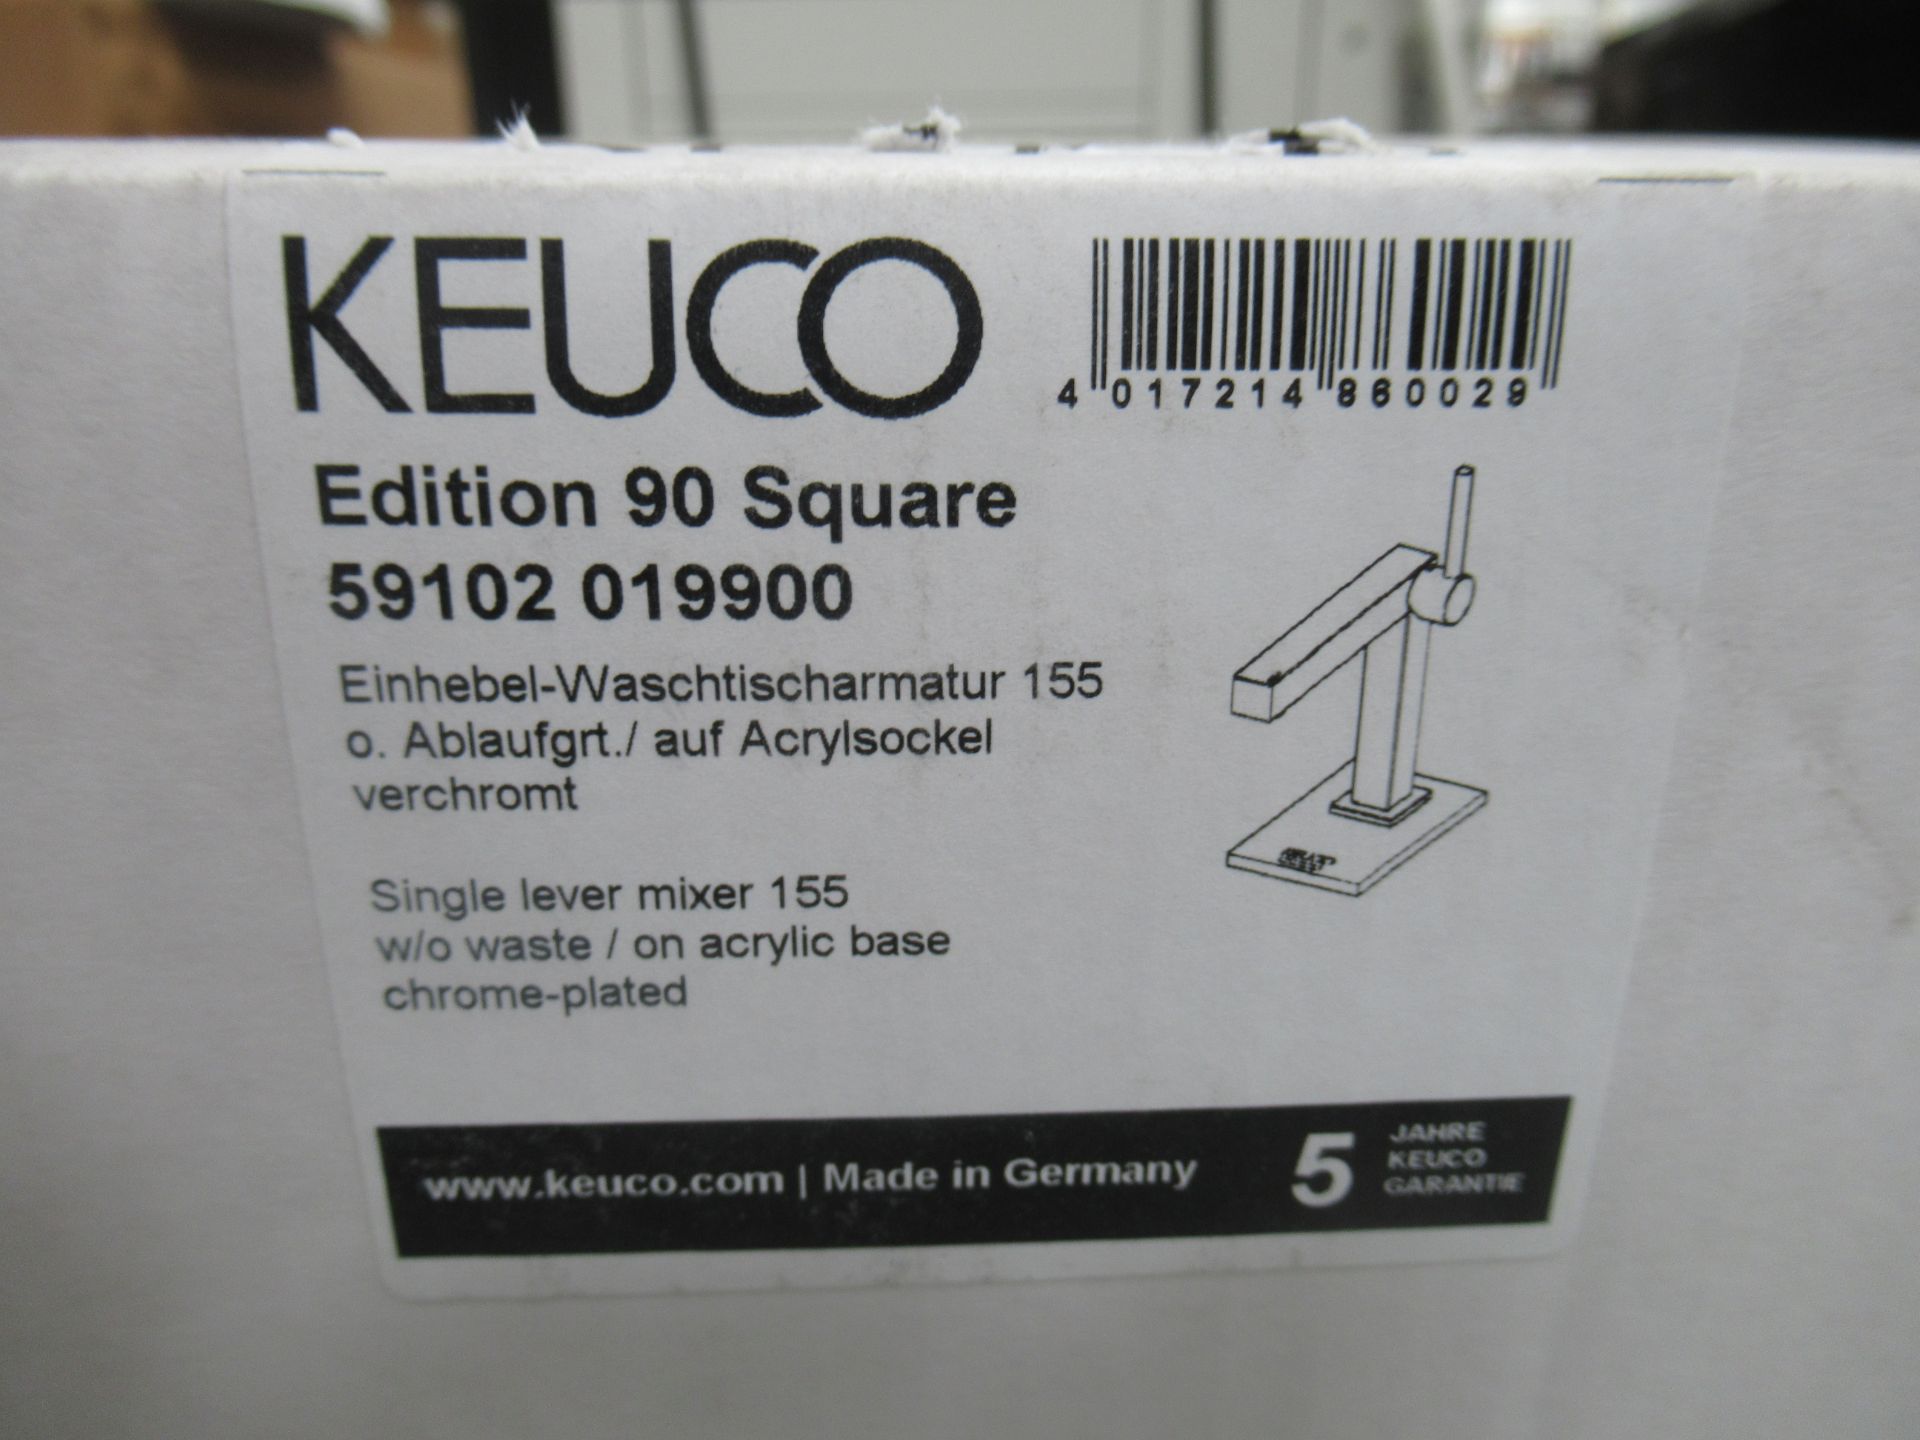 A Keuco Edition 90 Square- Single Lever Mixer 155-Tap, Chrome Plated, P/N 59102-019900 - Image 2 of 3